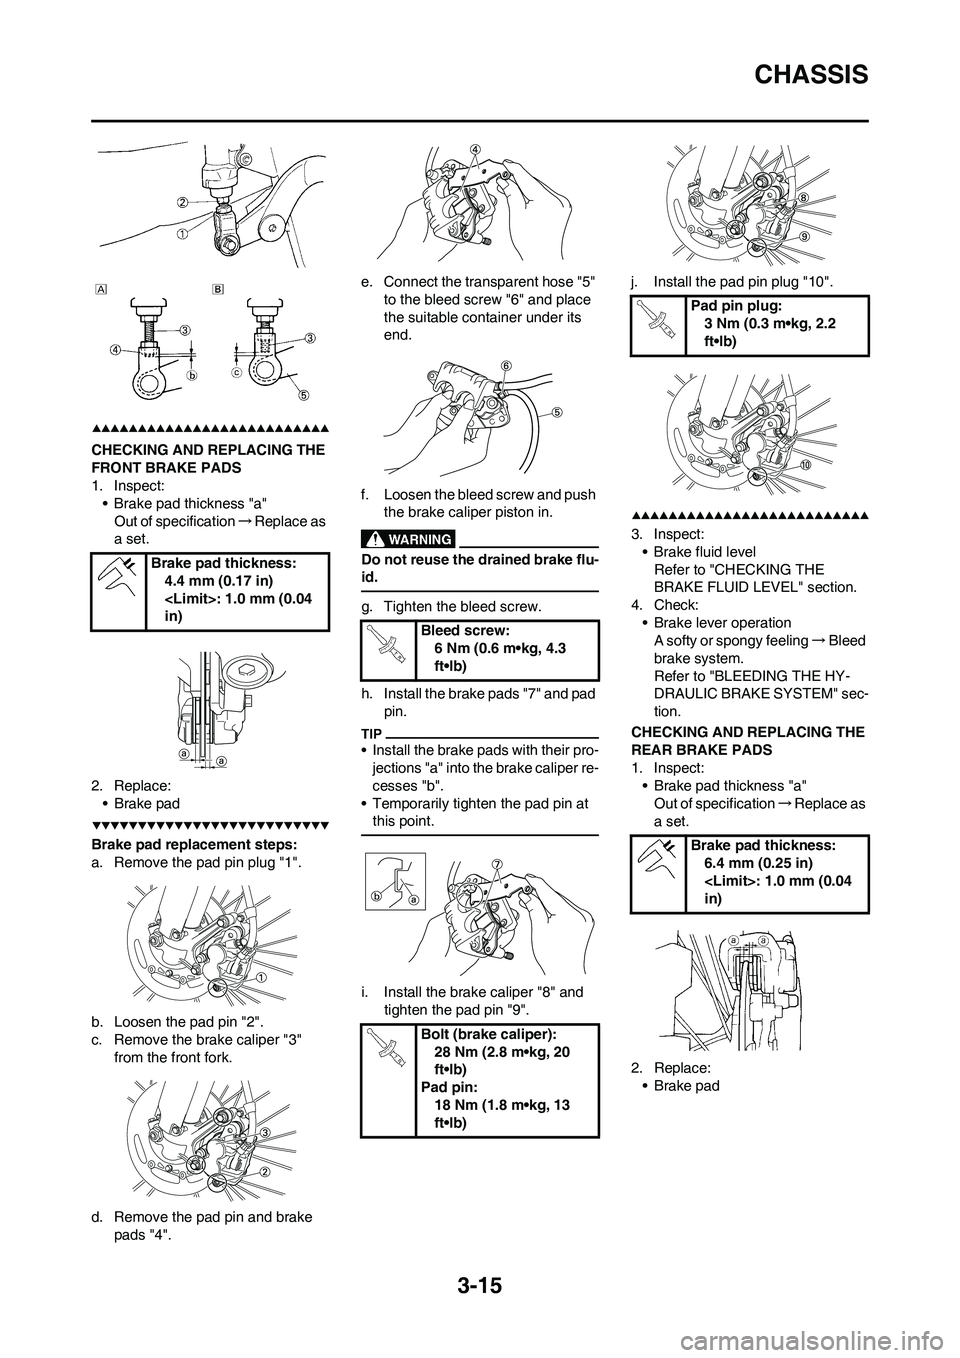 YAMAHA YZ450F 2009  Owners Manual 3-15
CHASSIS
CHECKING AND REPLACING THE 
FRONT BRAKE PADS
1. Inspect:
• Brake pad thickness "a"
Out of specification→Replace as 
a set.
2. Replace:
•Brake pad
Brake pad replacement steps:
a. Rem